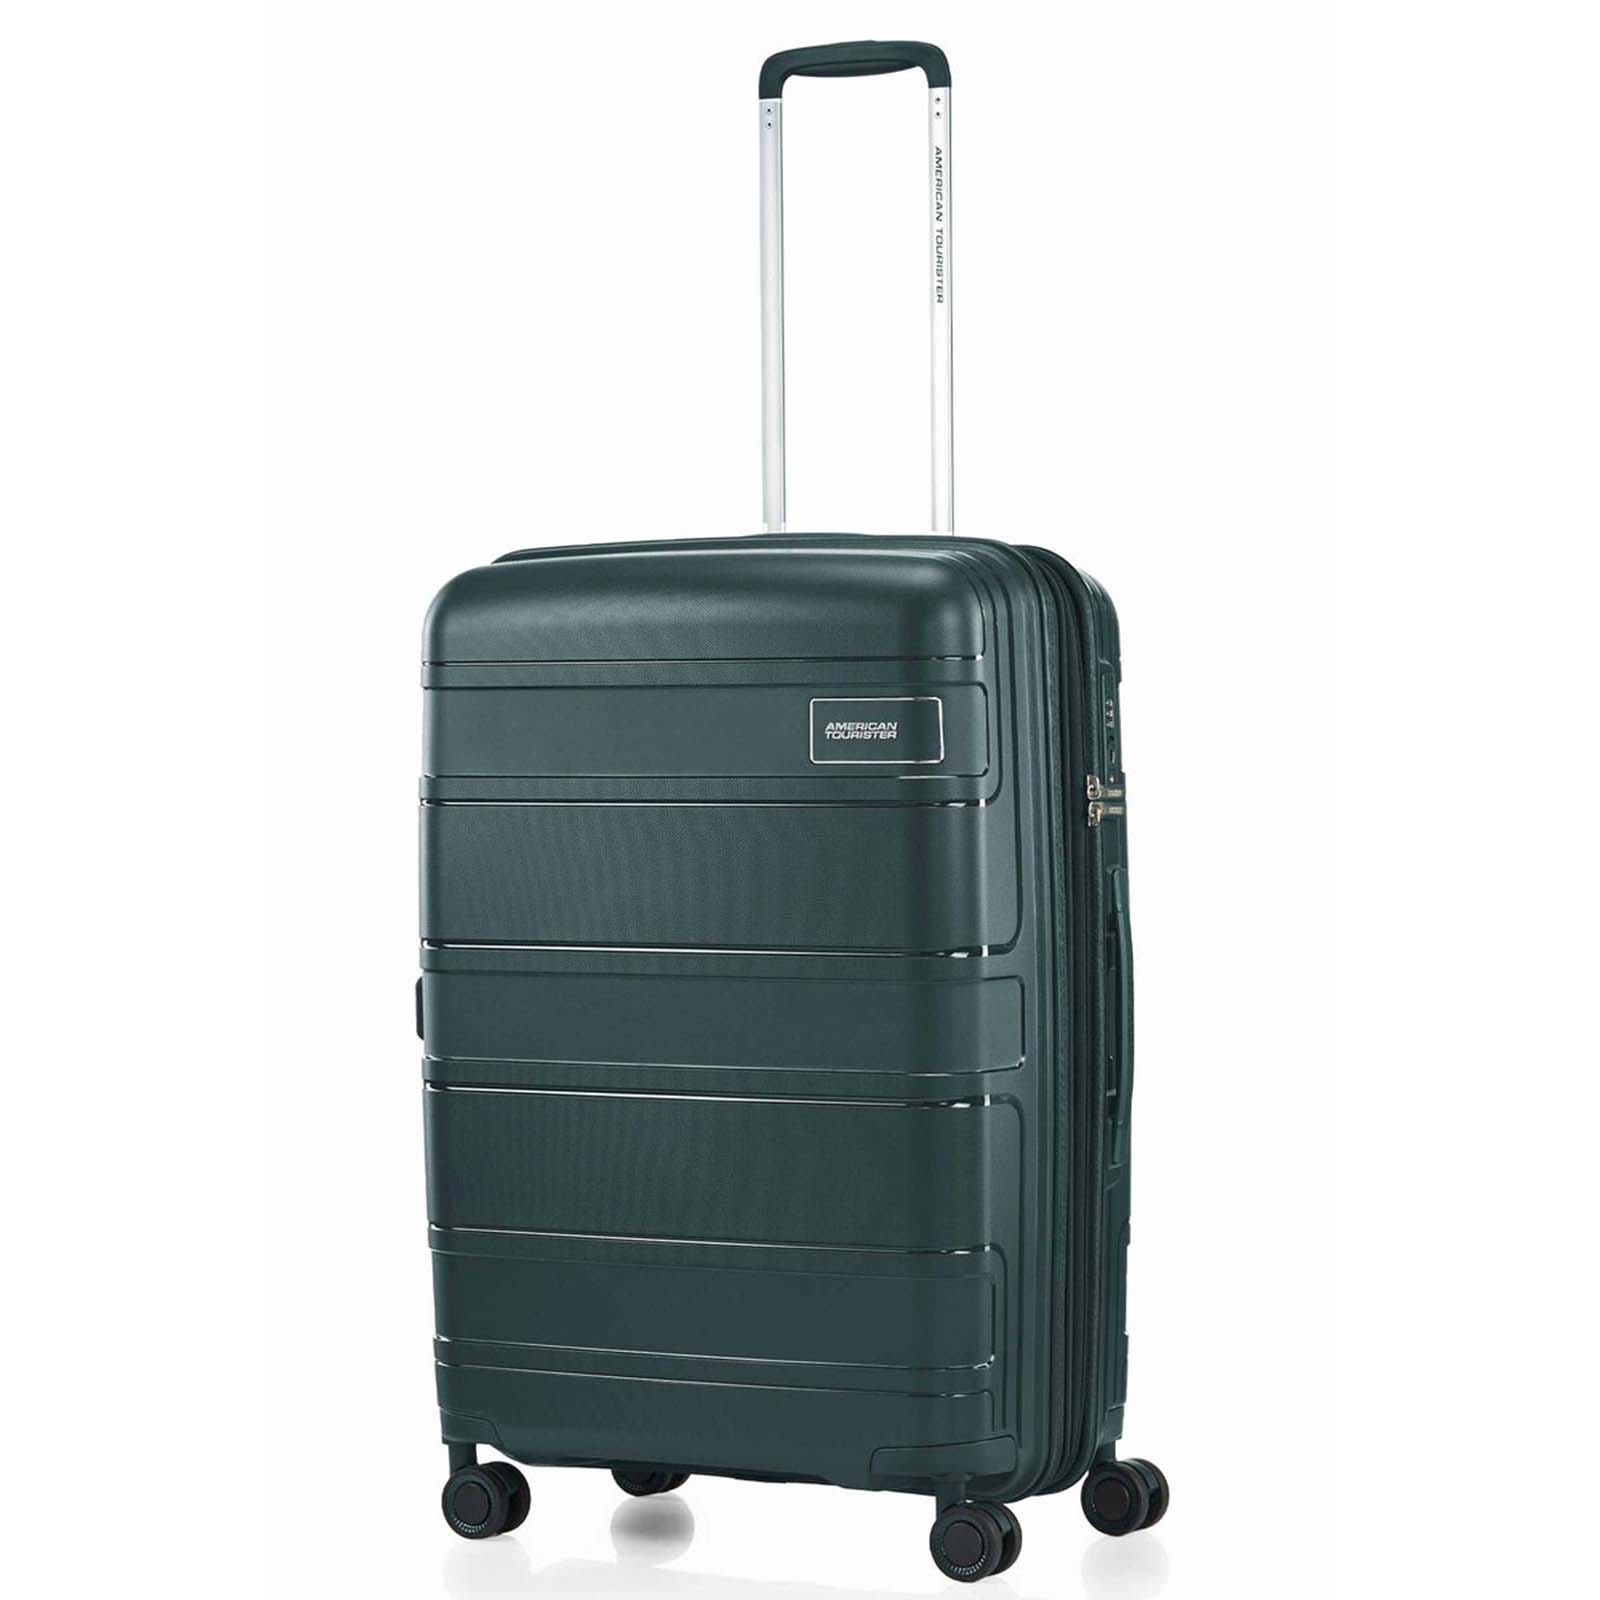 American-Tourister-Light-Max-69cm-Suitcase-Varsity-Green-Front-Angle